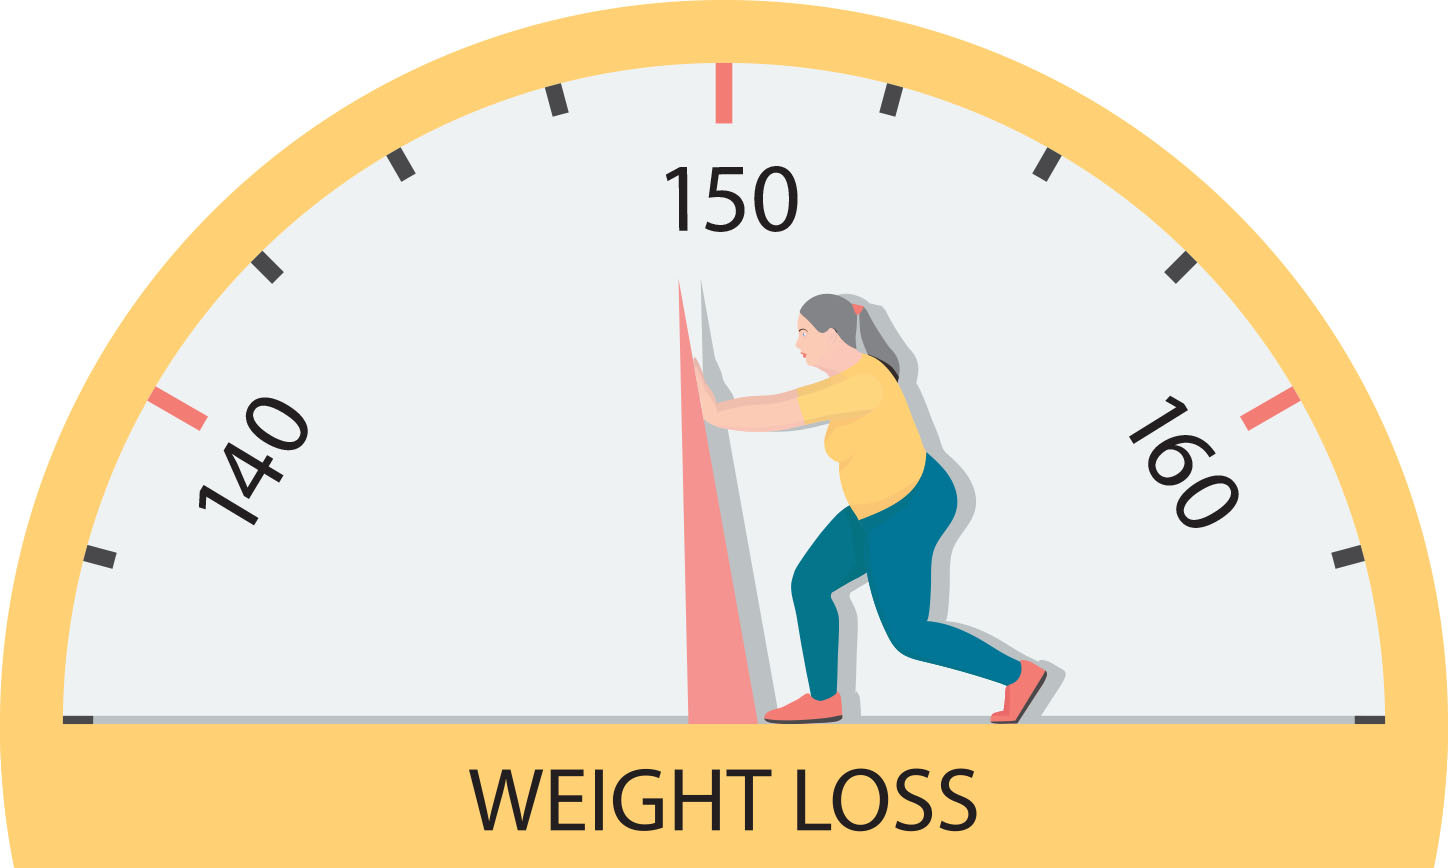 Tips to keep lost weight off in the New Year - Harvard Health